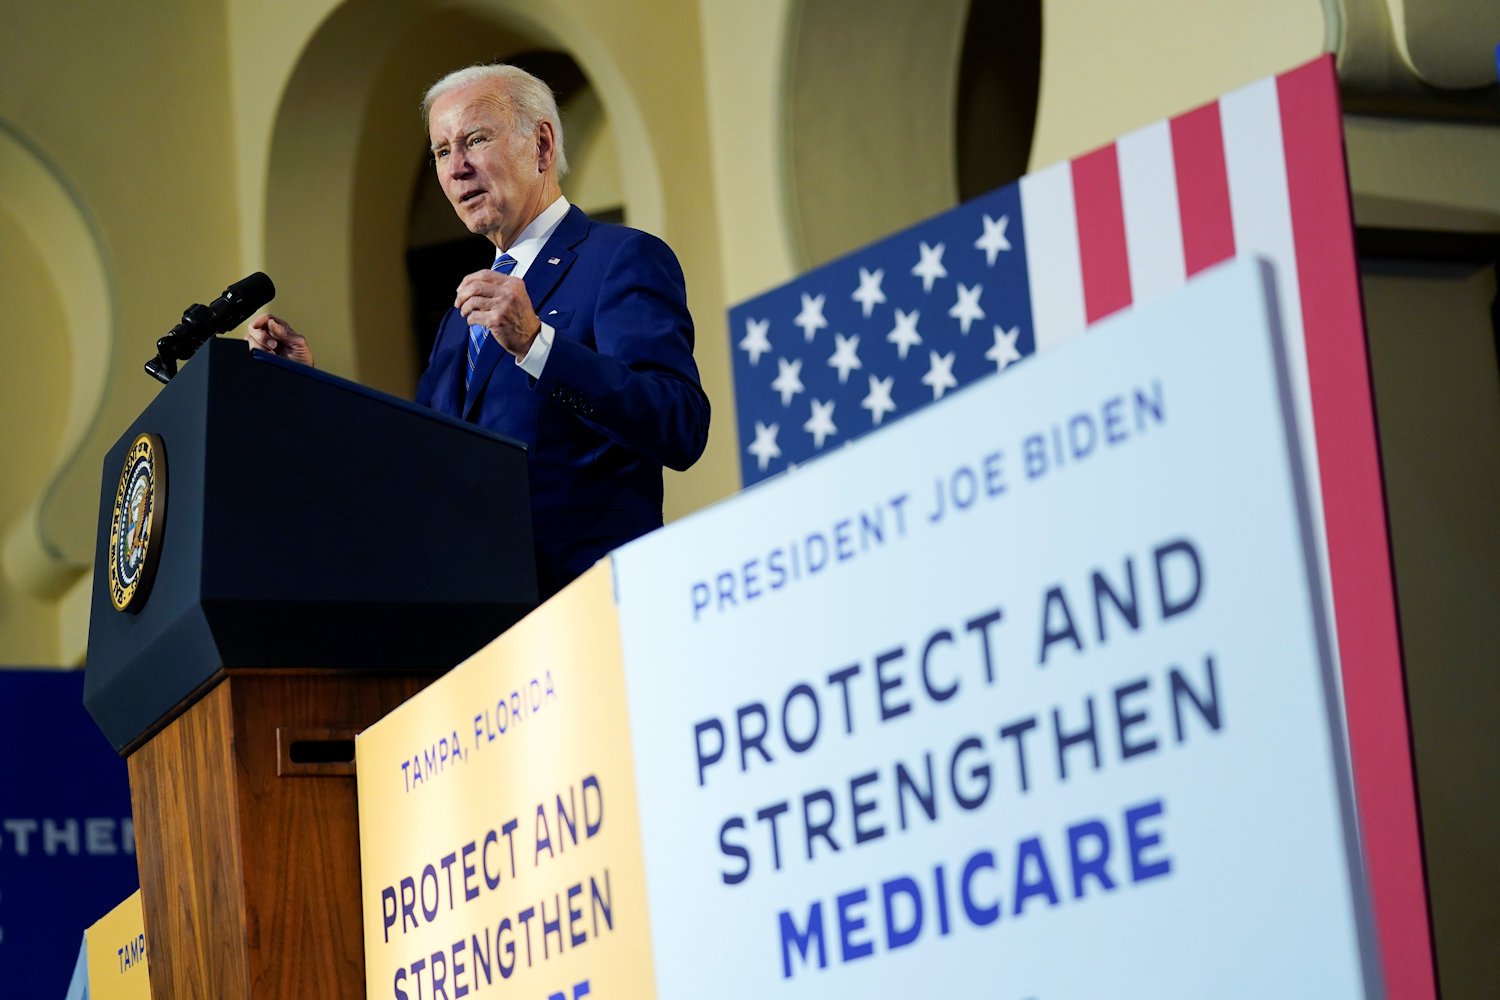 Biden’s Medicare Price Negotiation Push Is Broadly Popular. He’s Not Getting Much Credit